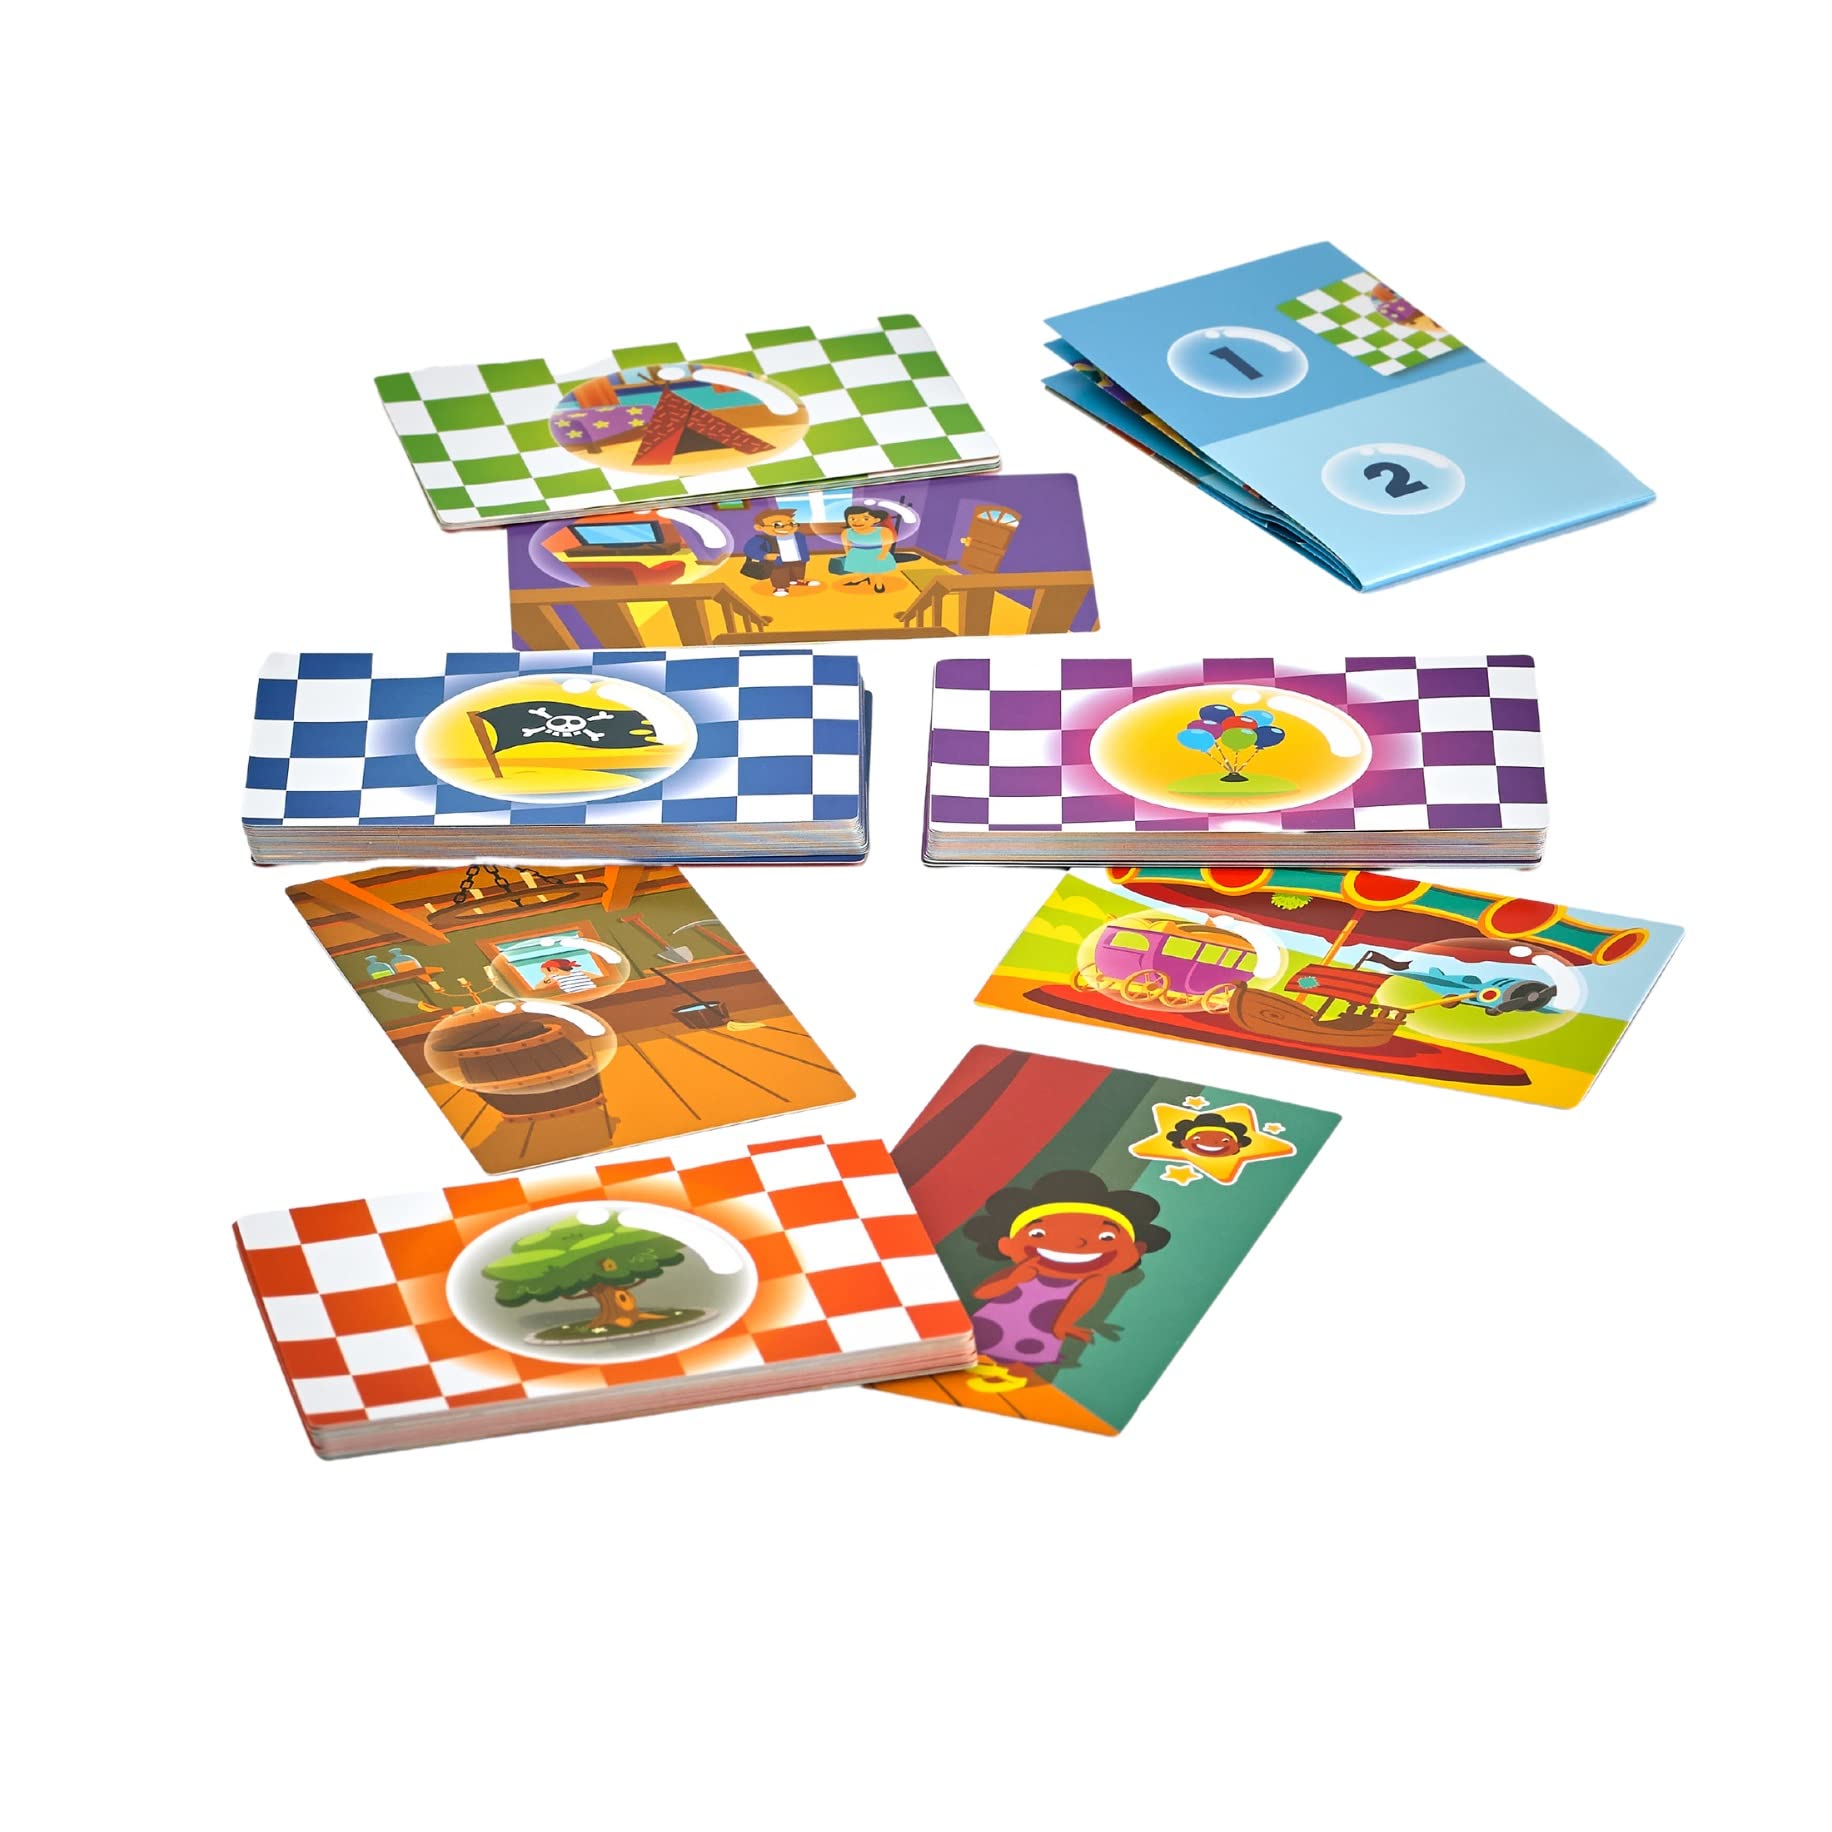 Bubble Stories Creative Preschool and Children Escape Game - Educational Pick a Path Card Game by Blue Orange Games - 1 to 2 Players for Ages 4+